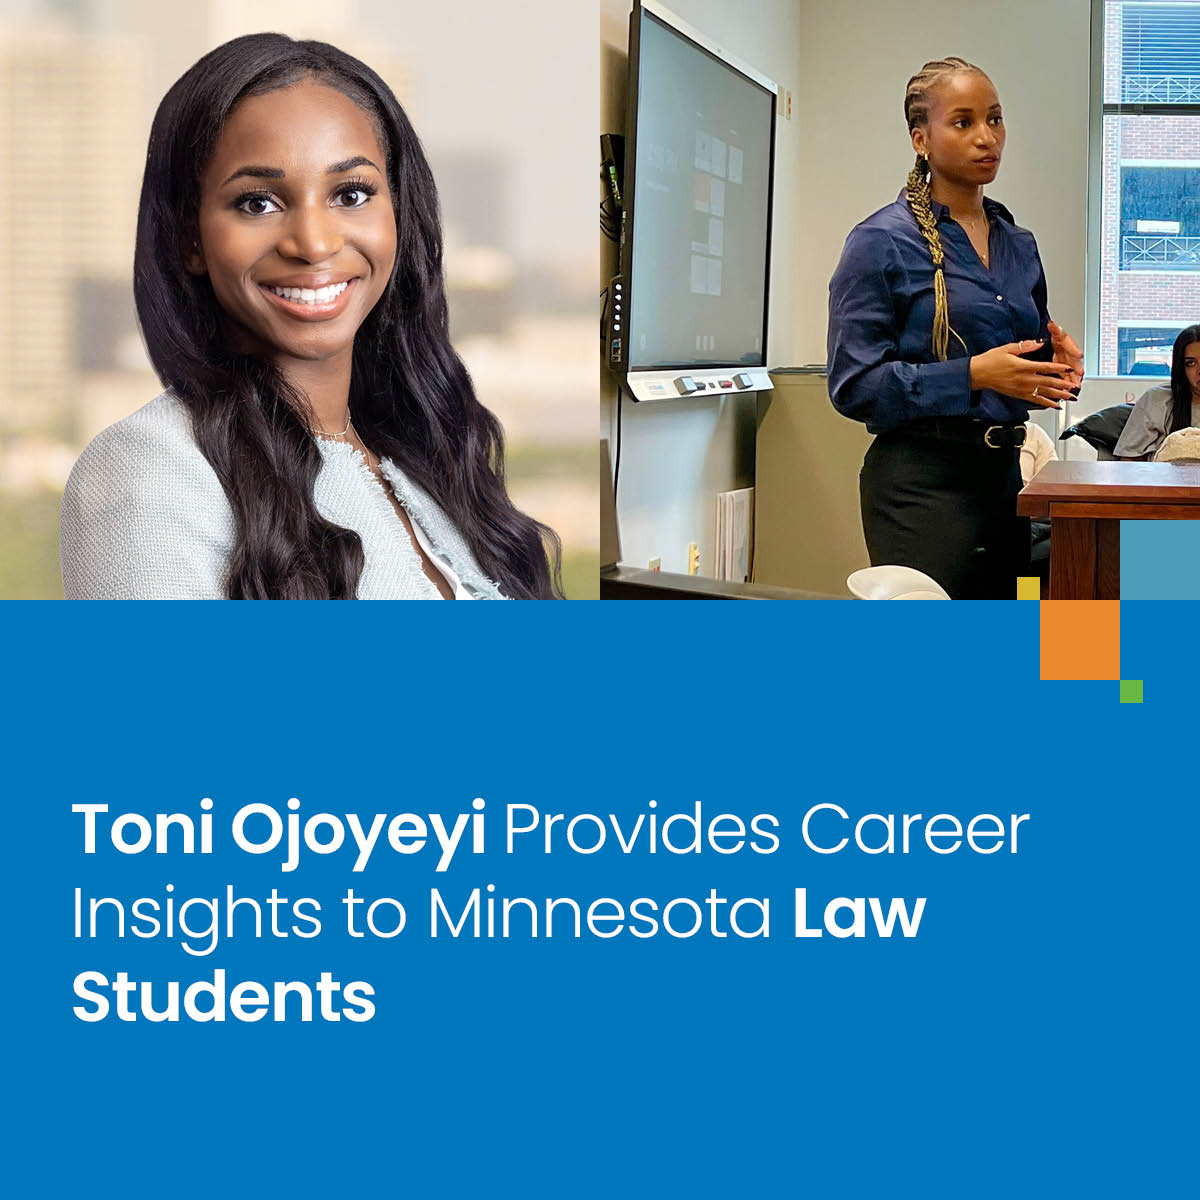 We love the way our attorneys inspire the next generation of legal professionals! Learn about Toni Ojoyeyi’s recent visit to @USTLawMN students. tinyurl.com/3crs86su